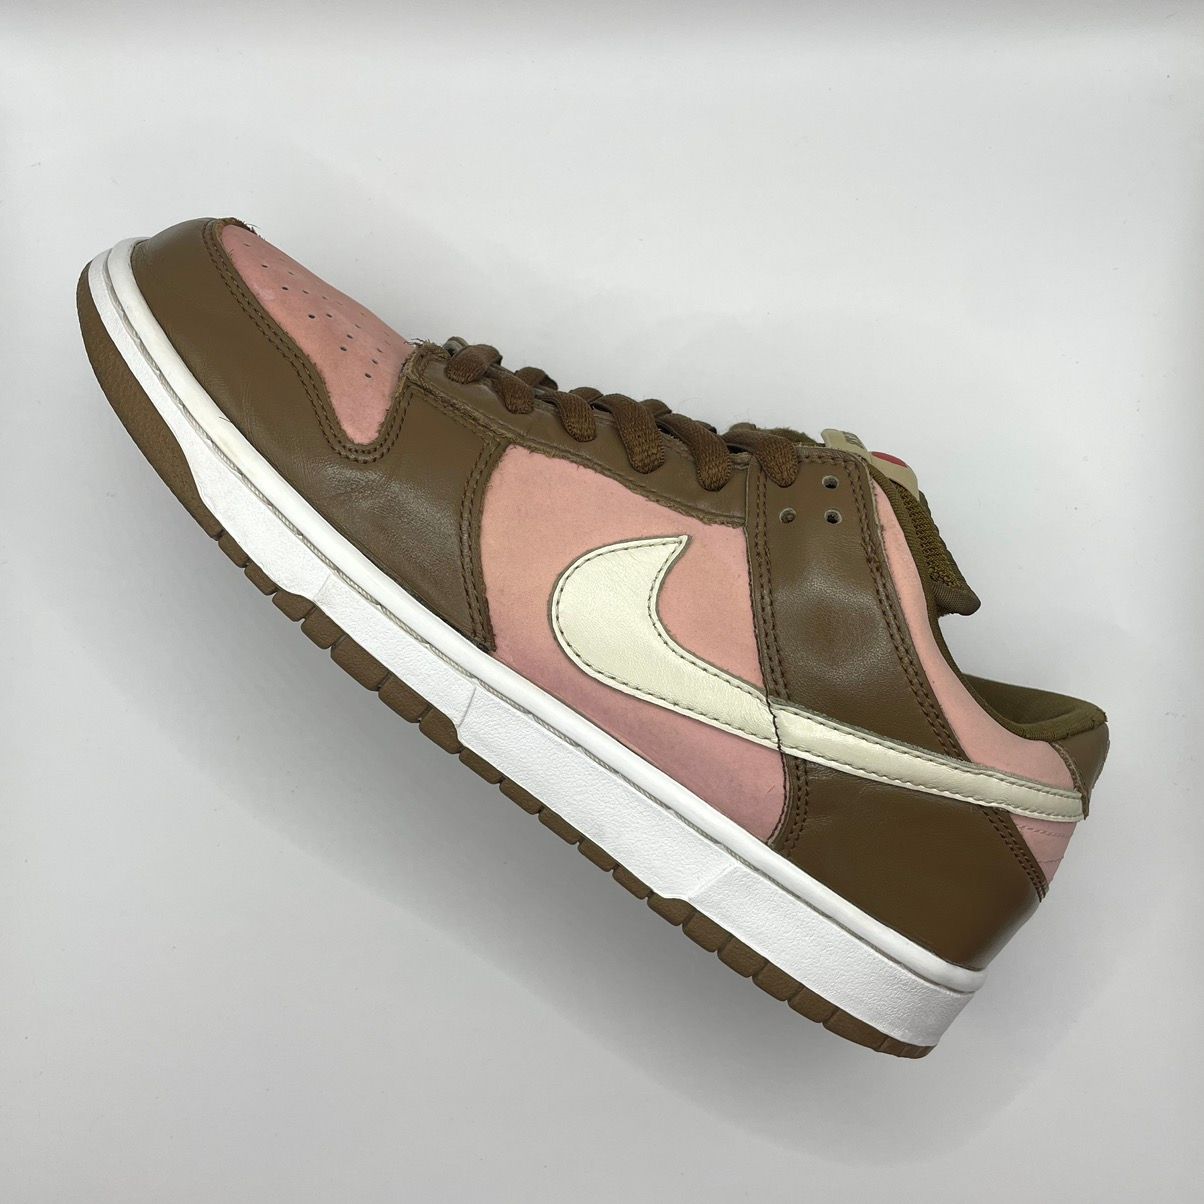 Pre-owned Nike X Stussy Nike Dunk Low Pro Sb Stussy Cherry Shy Pink 304292-671 Shoes